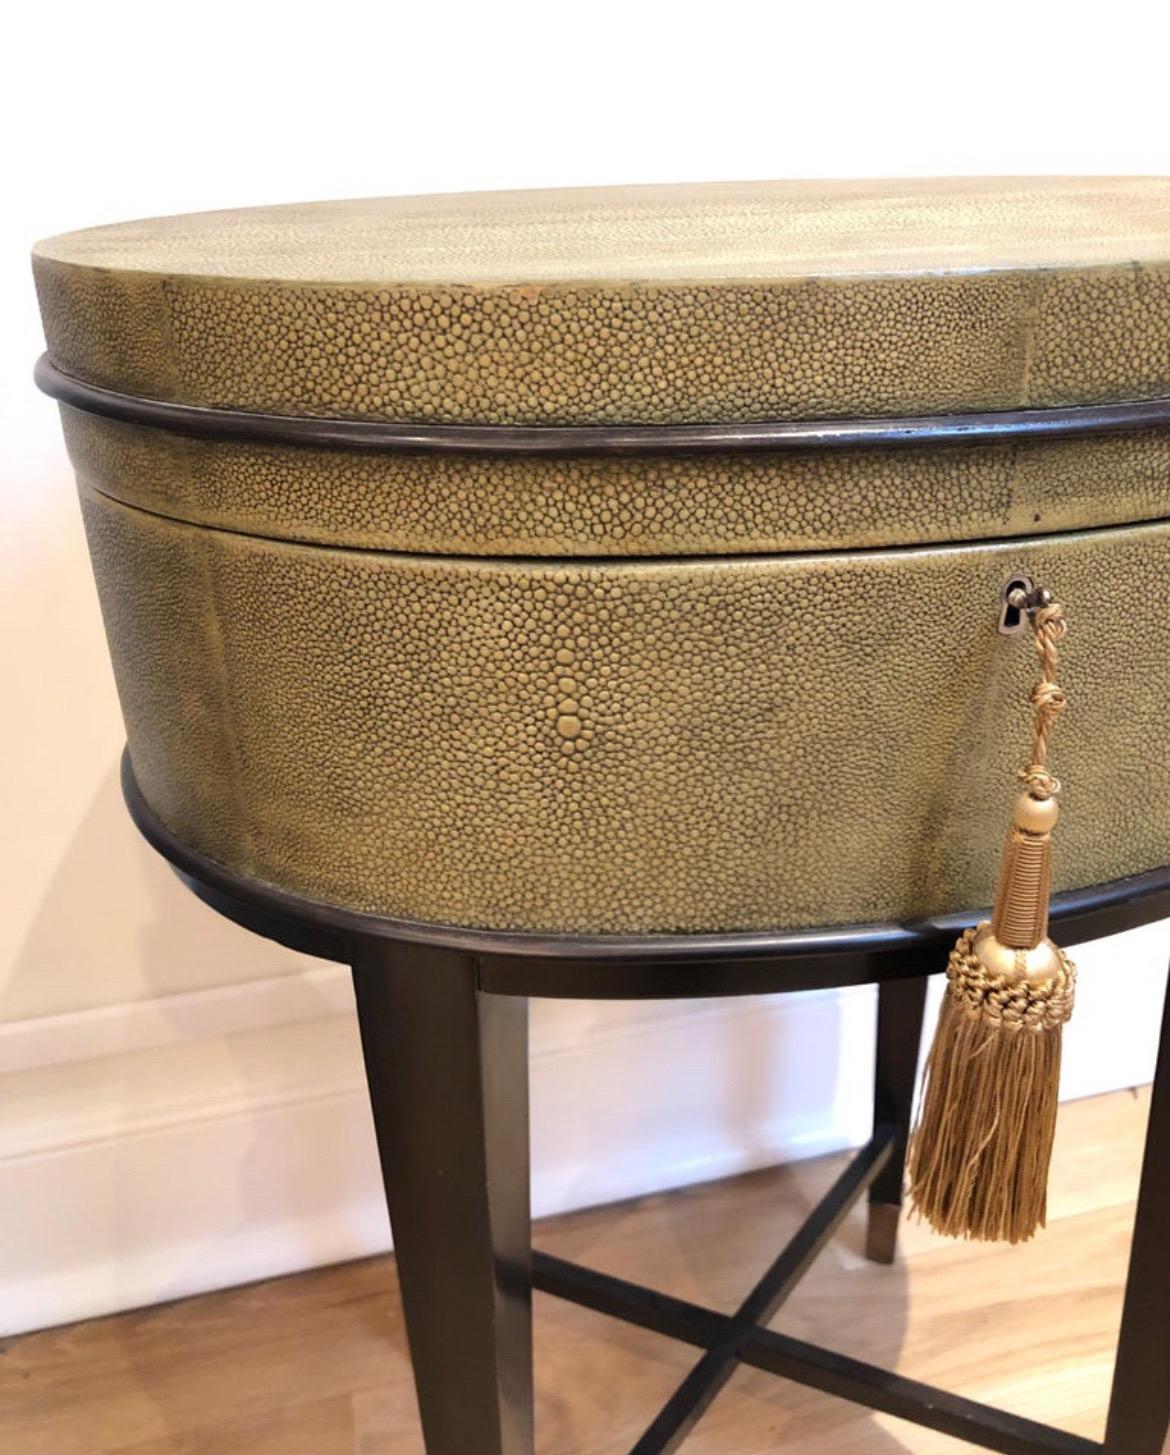 Oval Shaped Faux Shagreen Side Table. Top lifts for storage. Very unique table in great condition.
Brass lock missing key. We have a dummy provided with tassel. 

Attributed/In the Style of R&Y Augousti